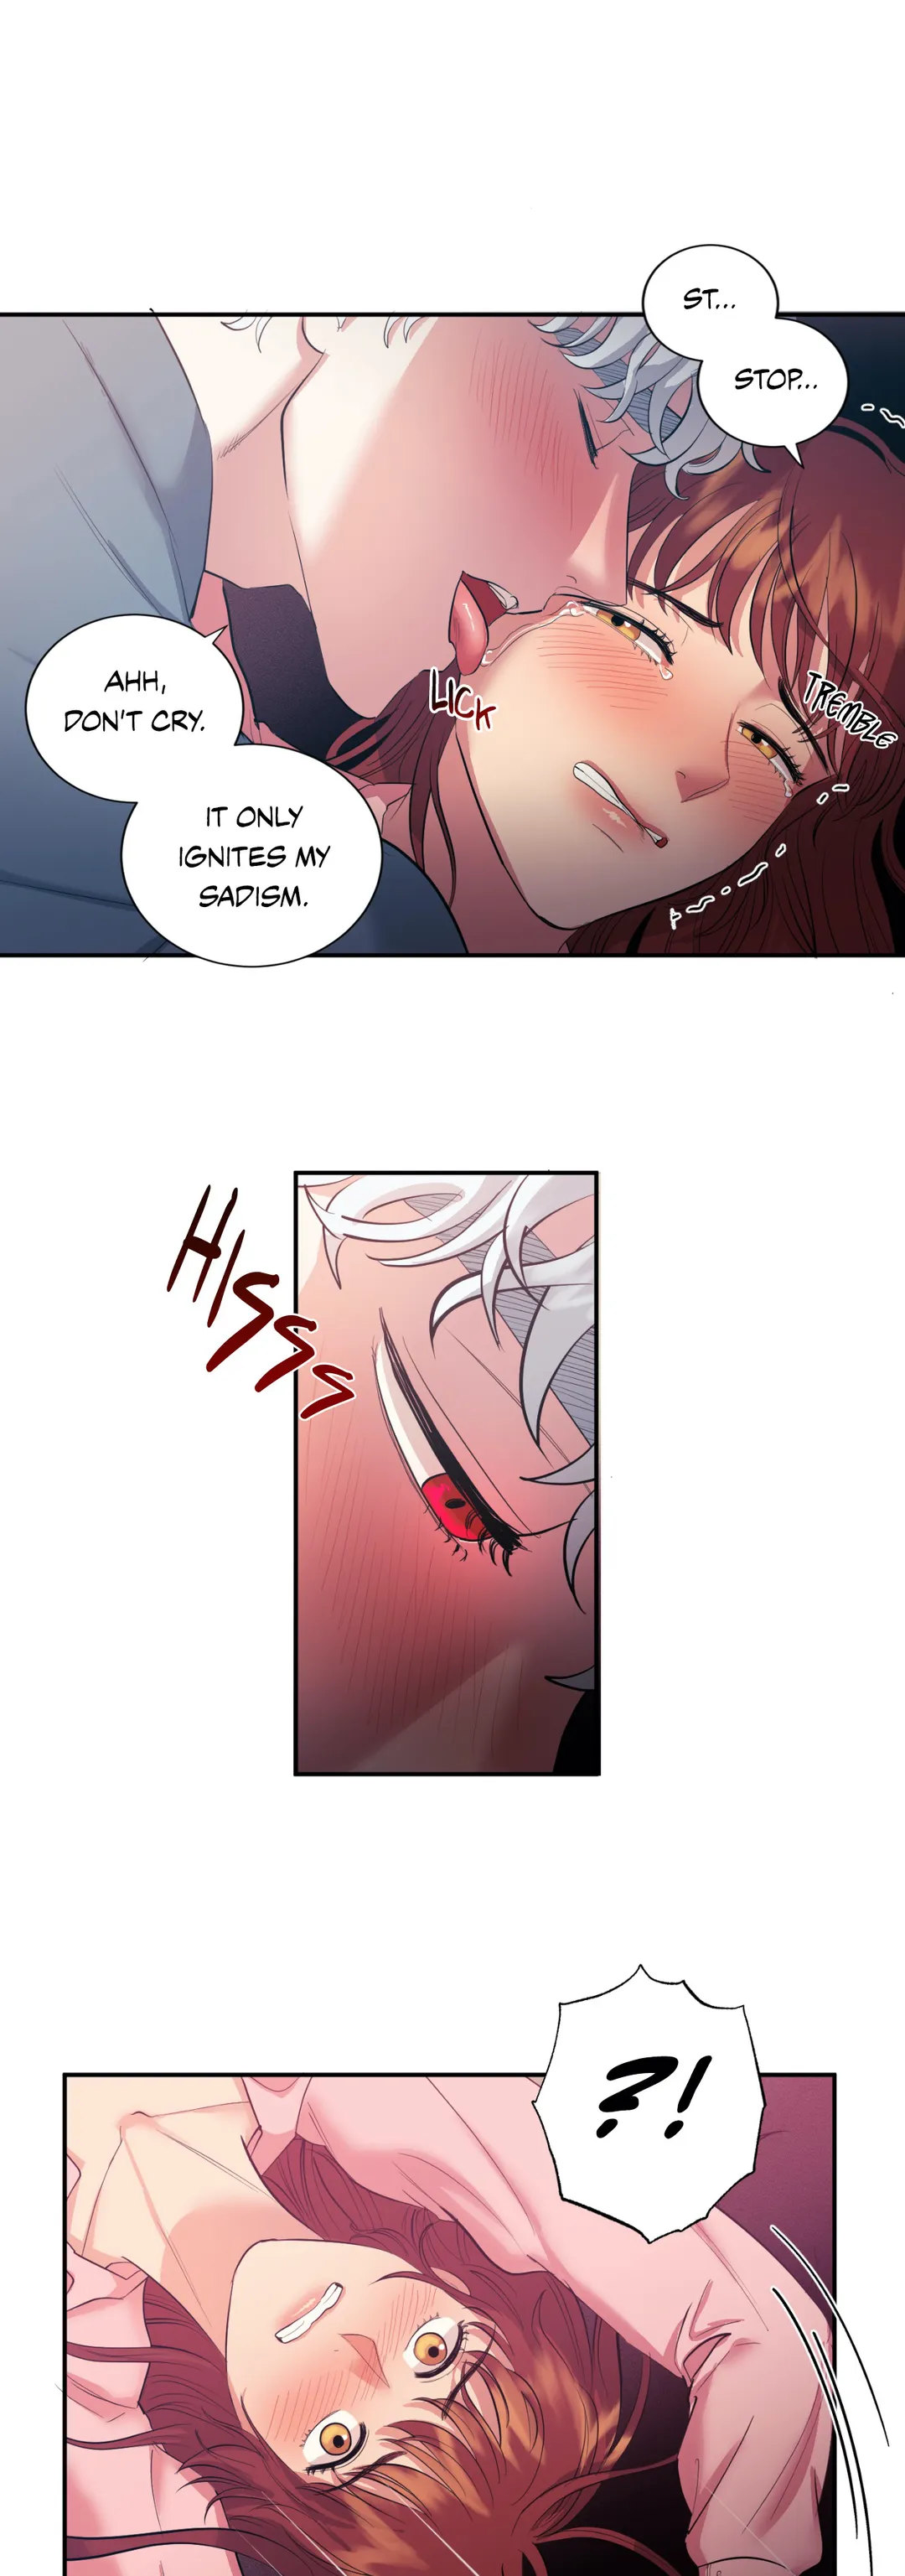 Hana’s Demons of Lust - Chapter 10 Page 7